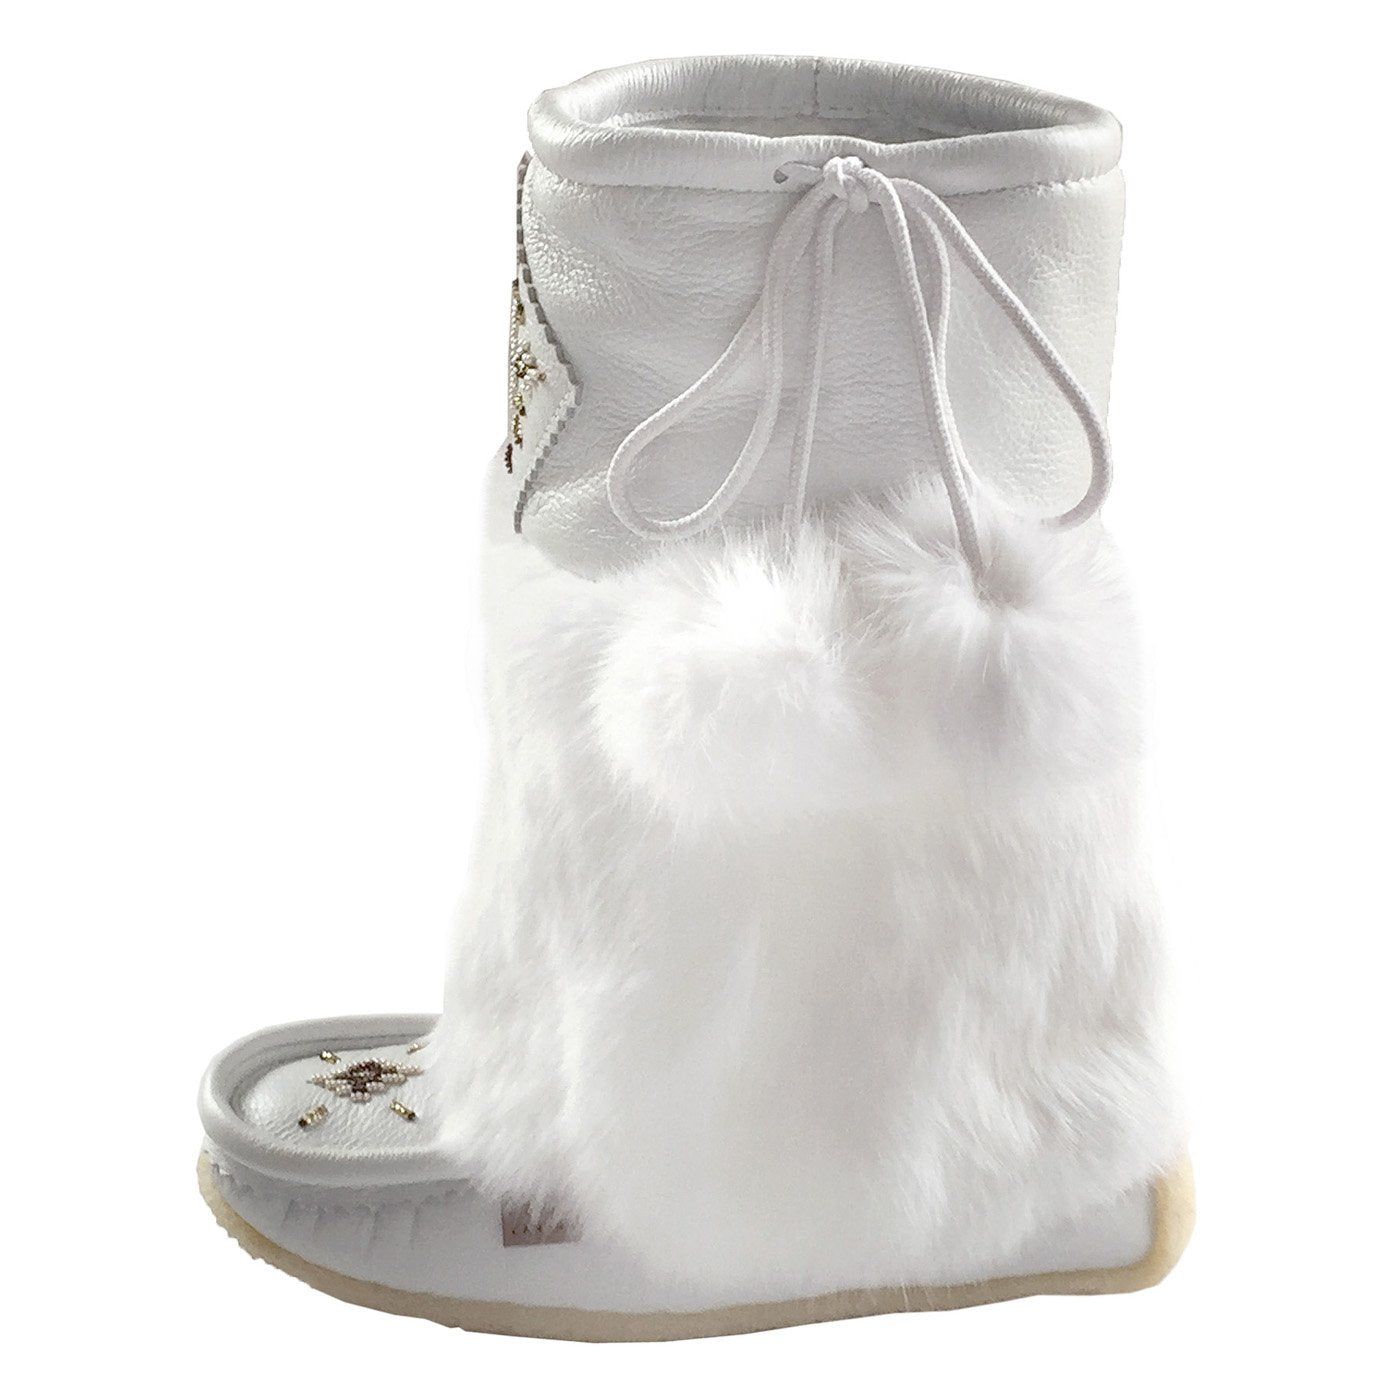 Women's 13" White Leather Mukluks On Sale